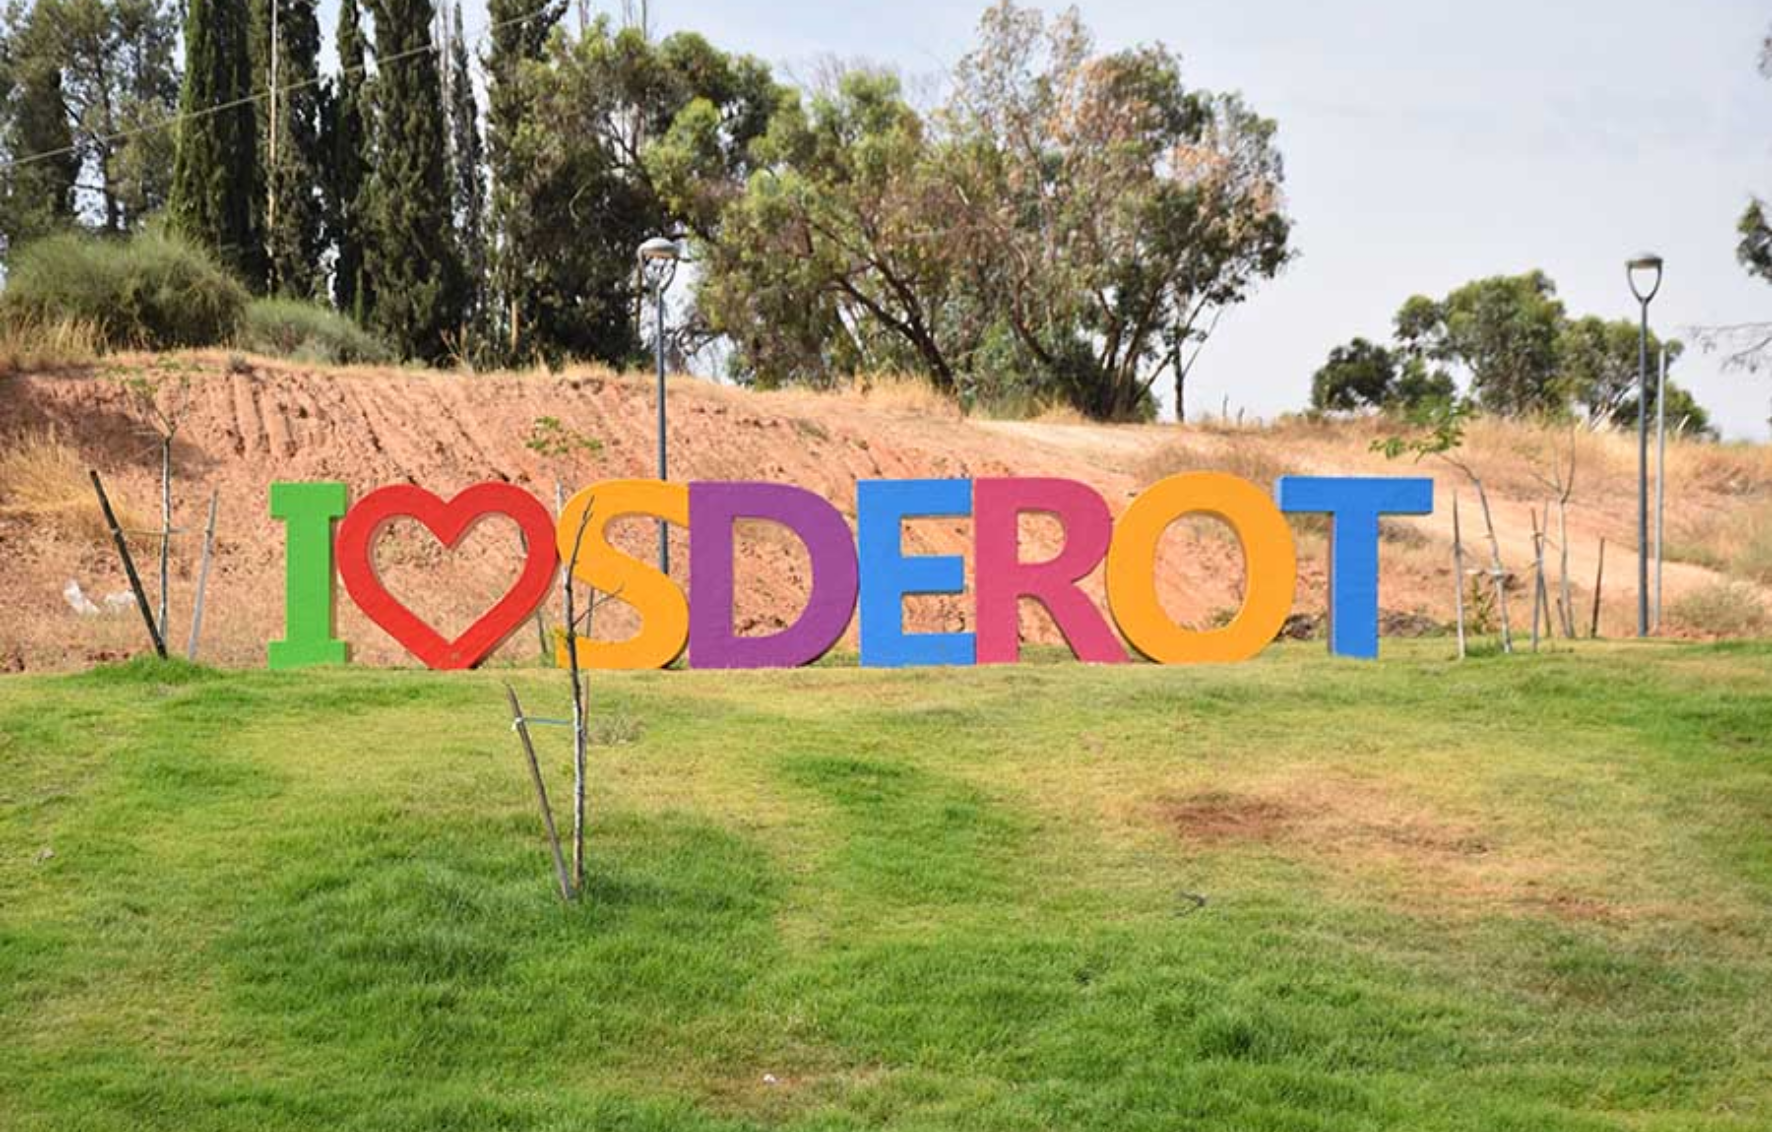 Your support helps children, families and services in Sderot